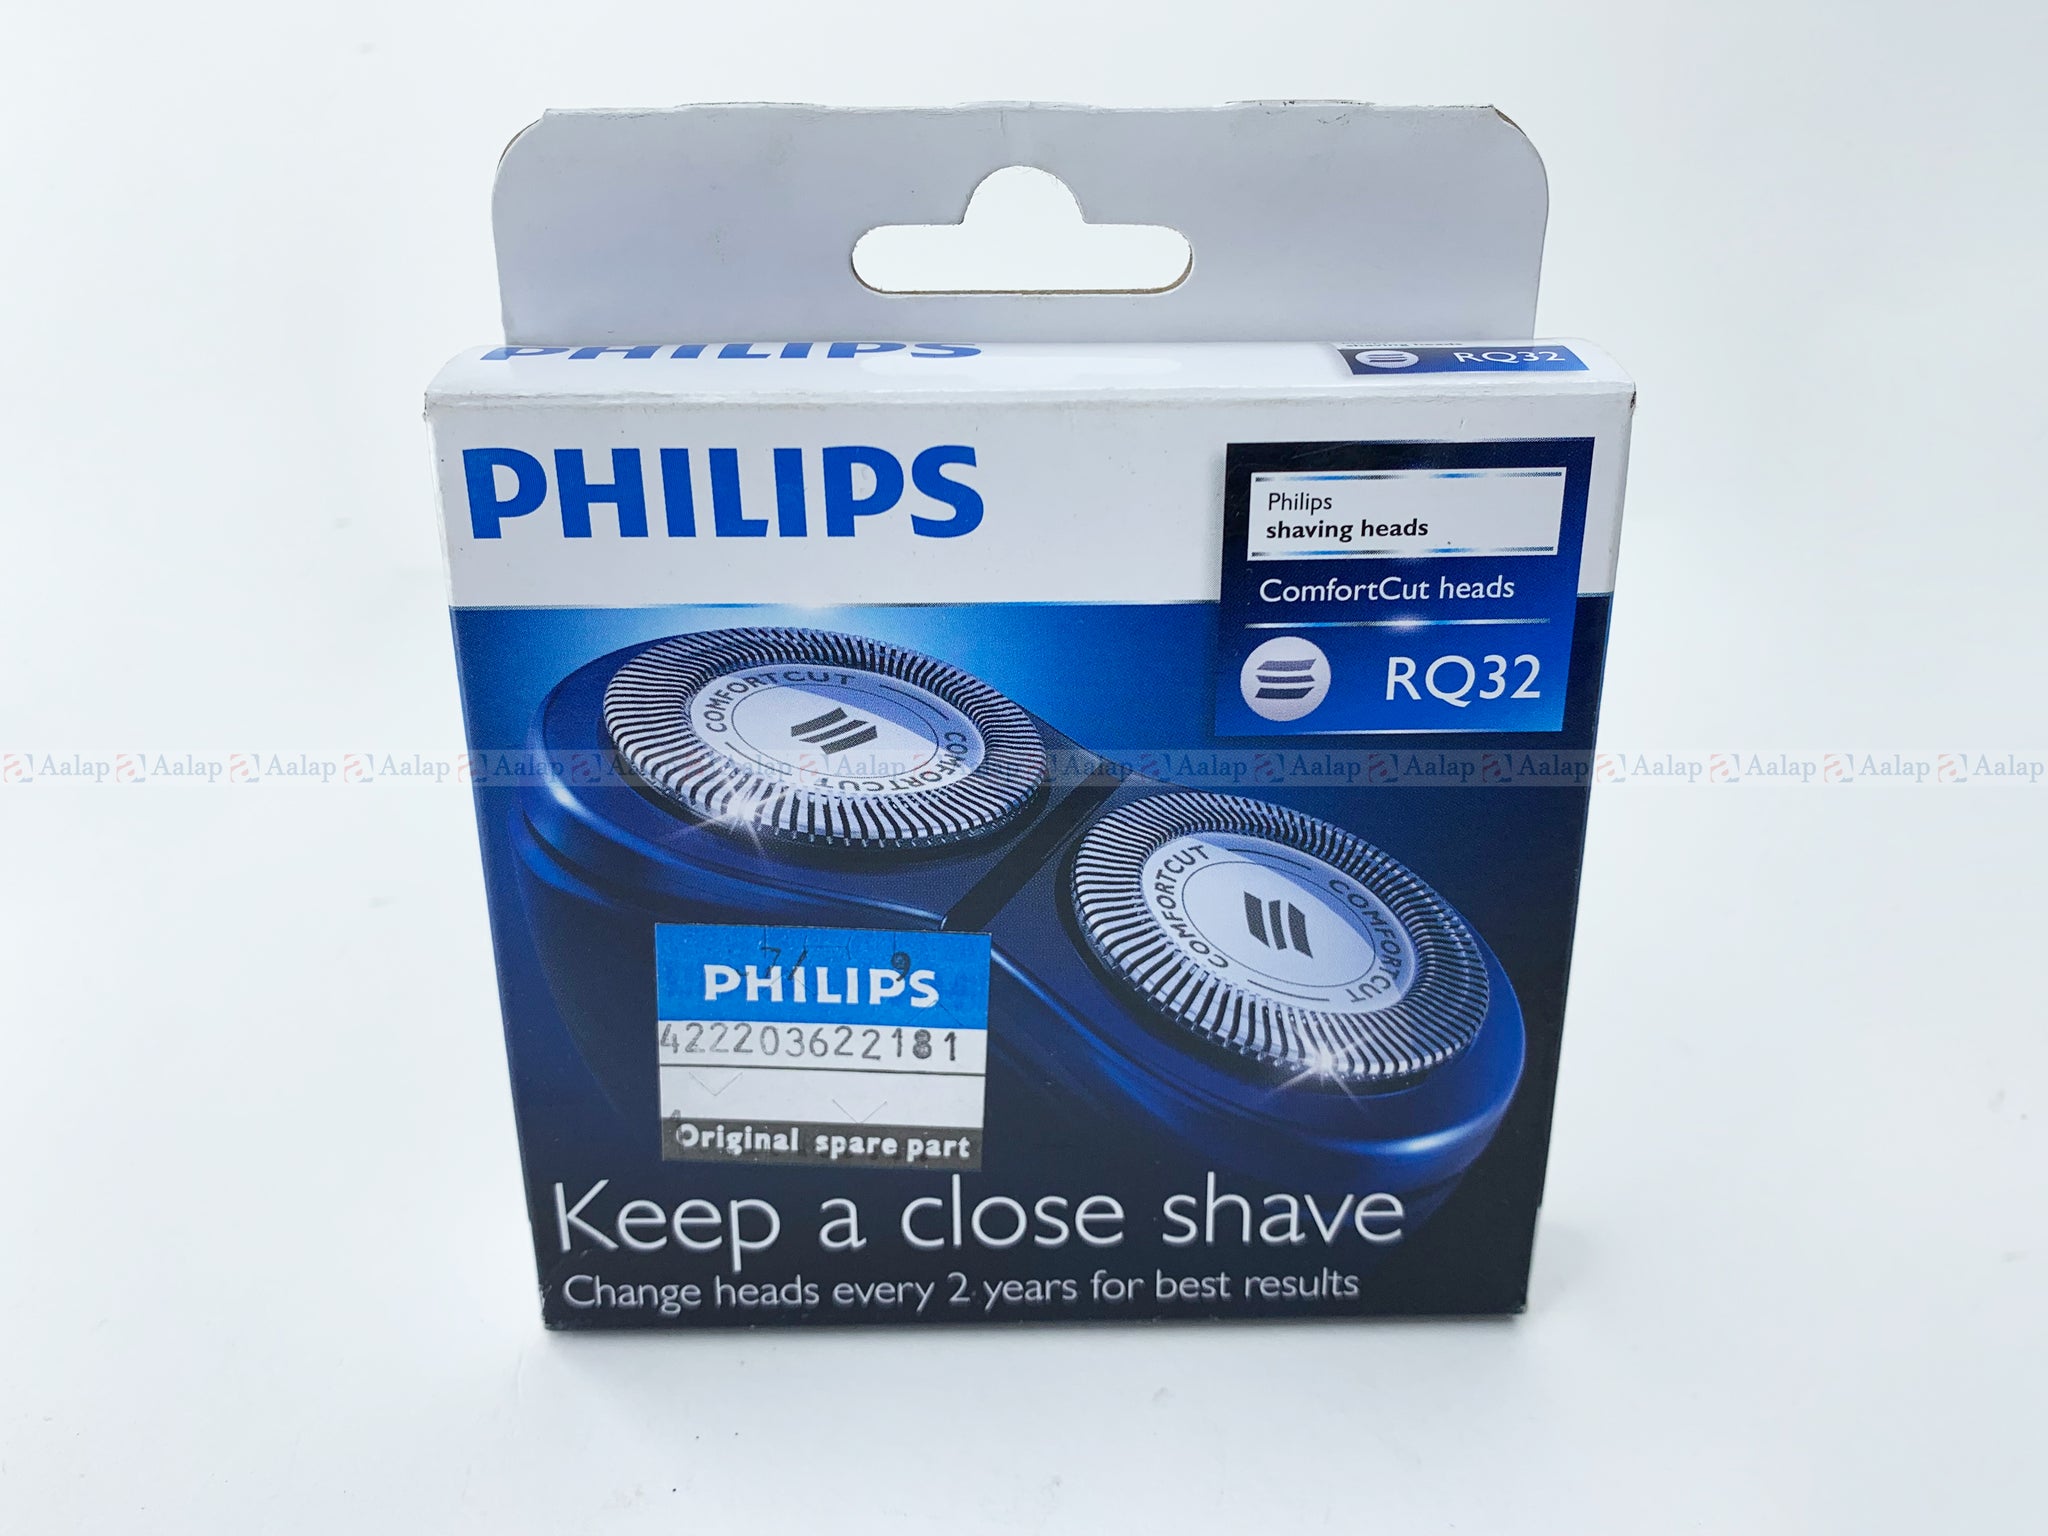 Replacement shaving heads